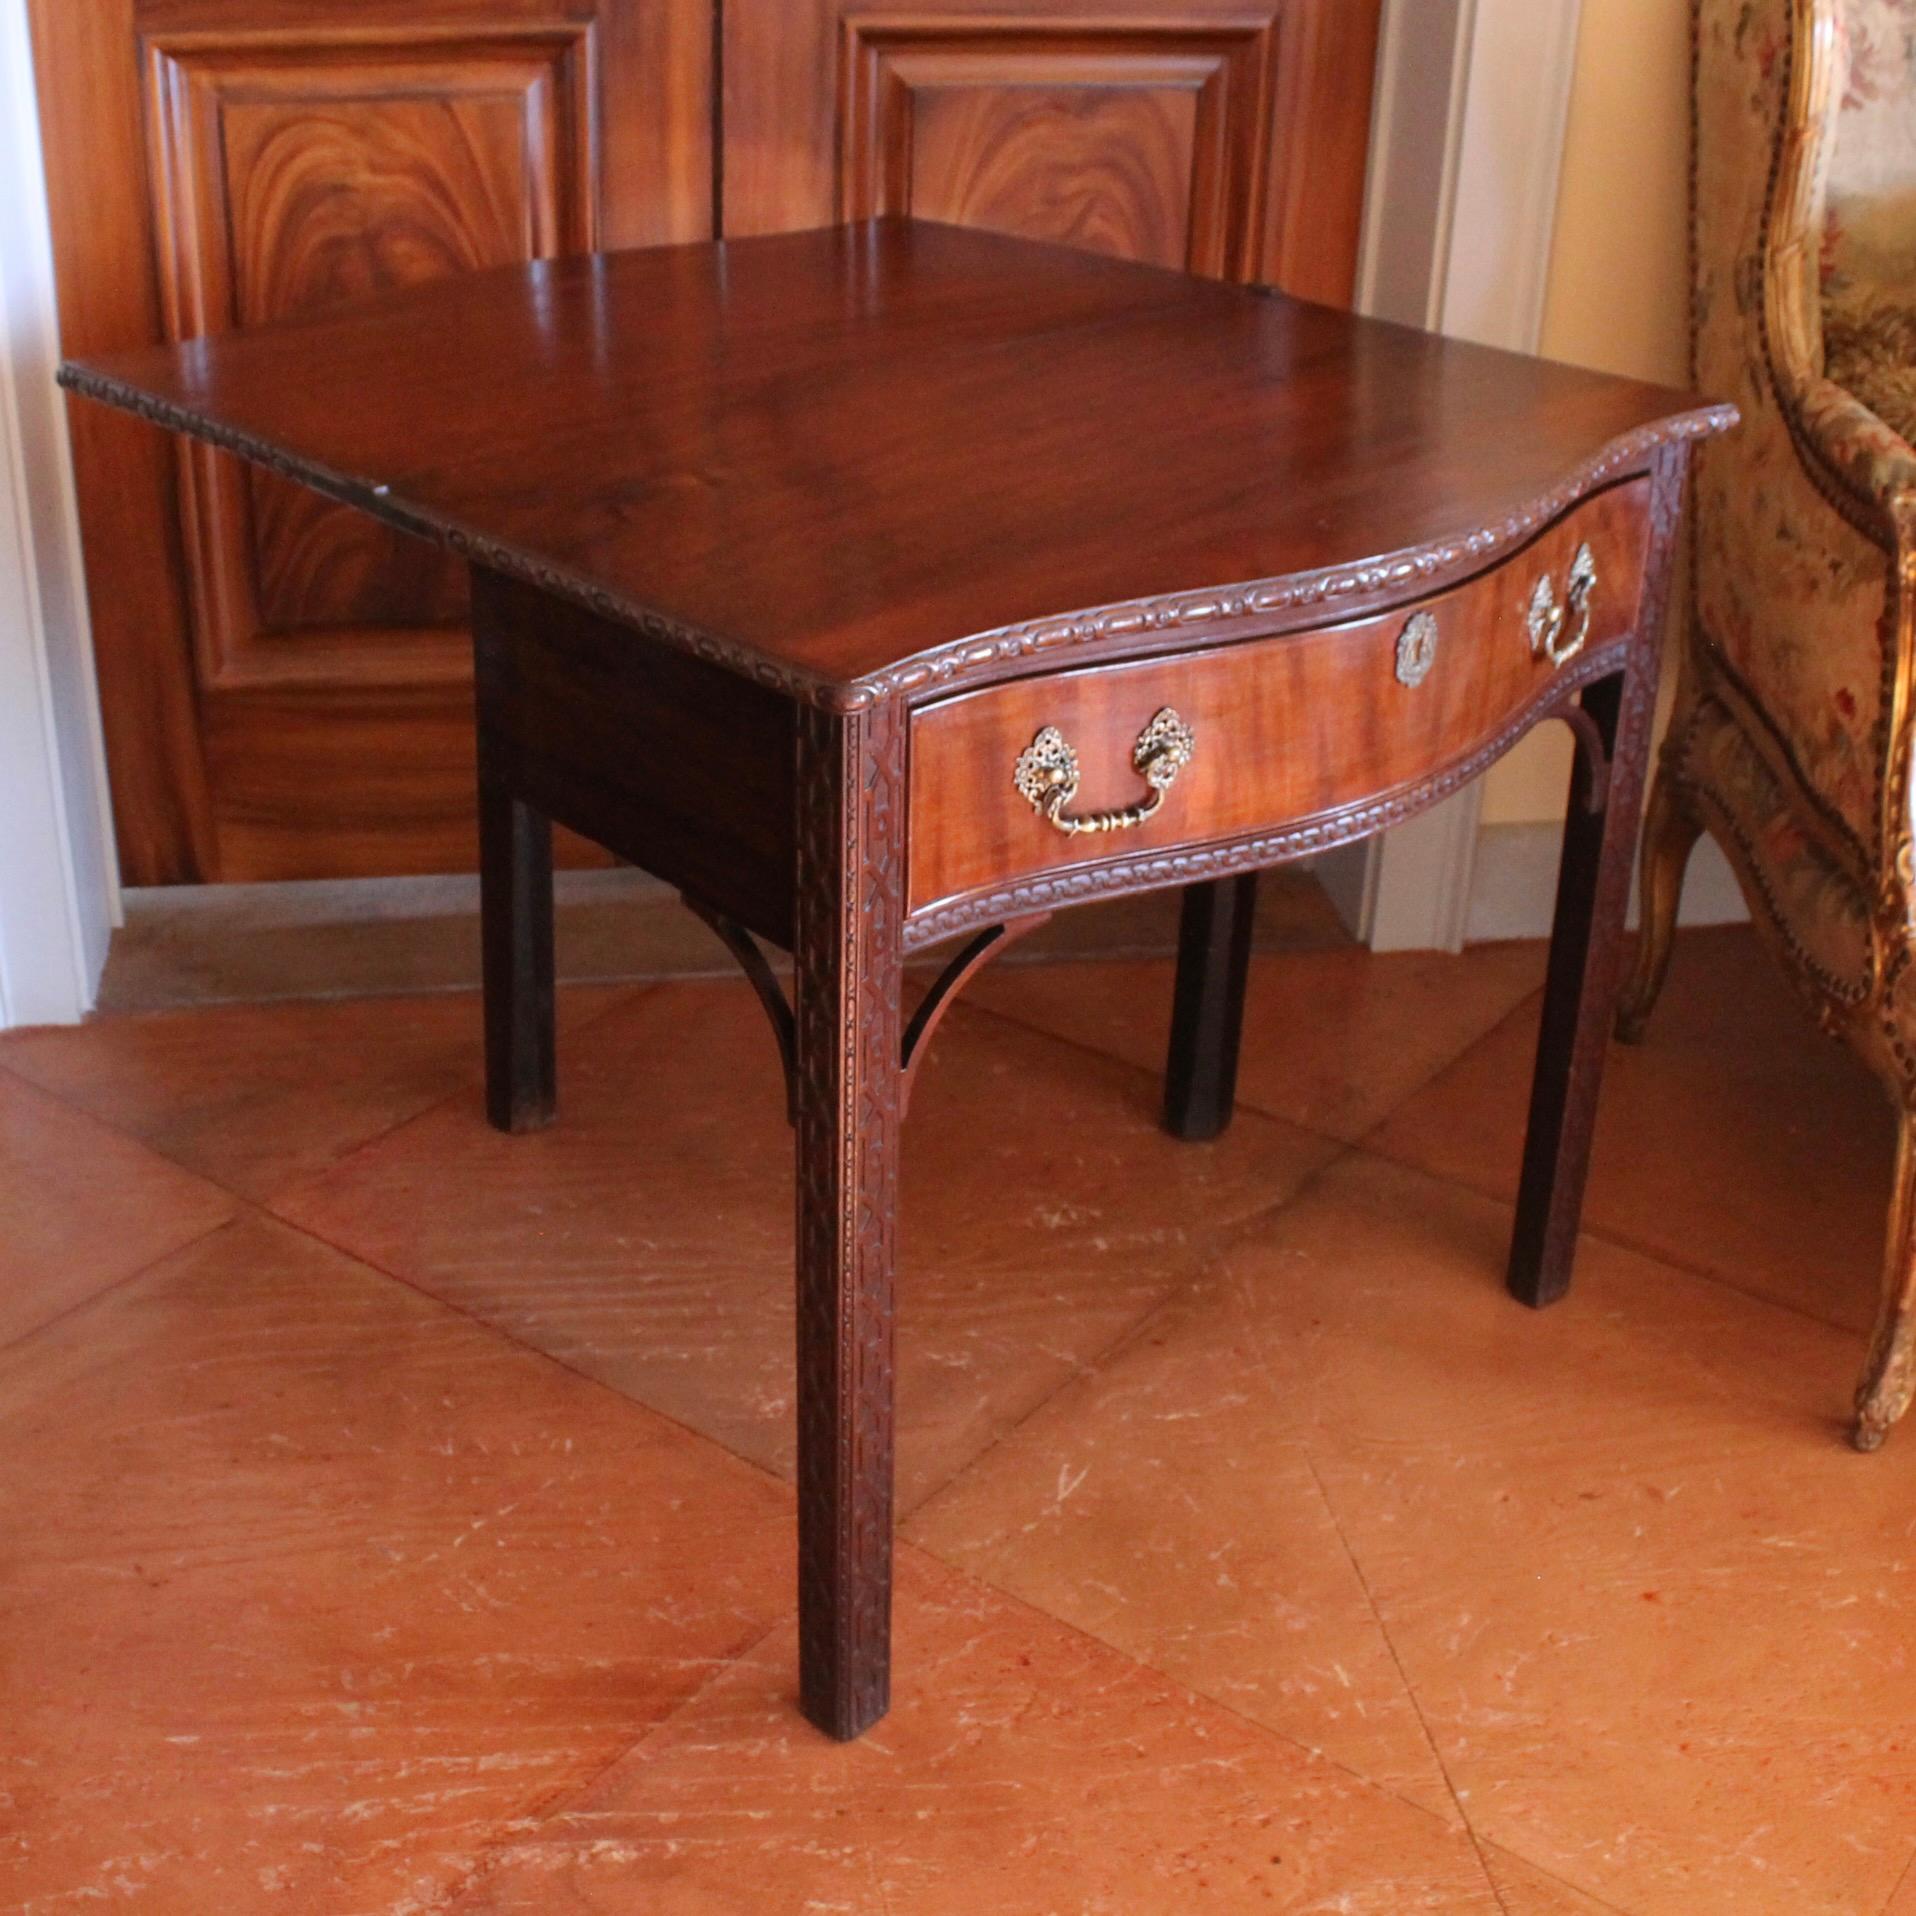 George III Serpentine Front Table With Chinese Chippendale Fret Legs, 18th c. For Sale 2